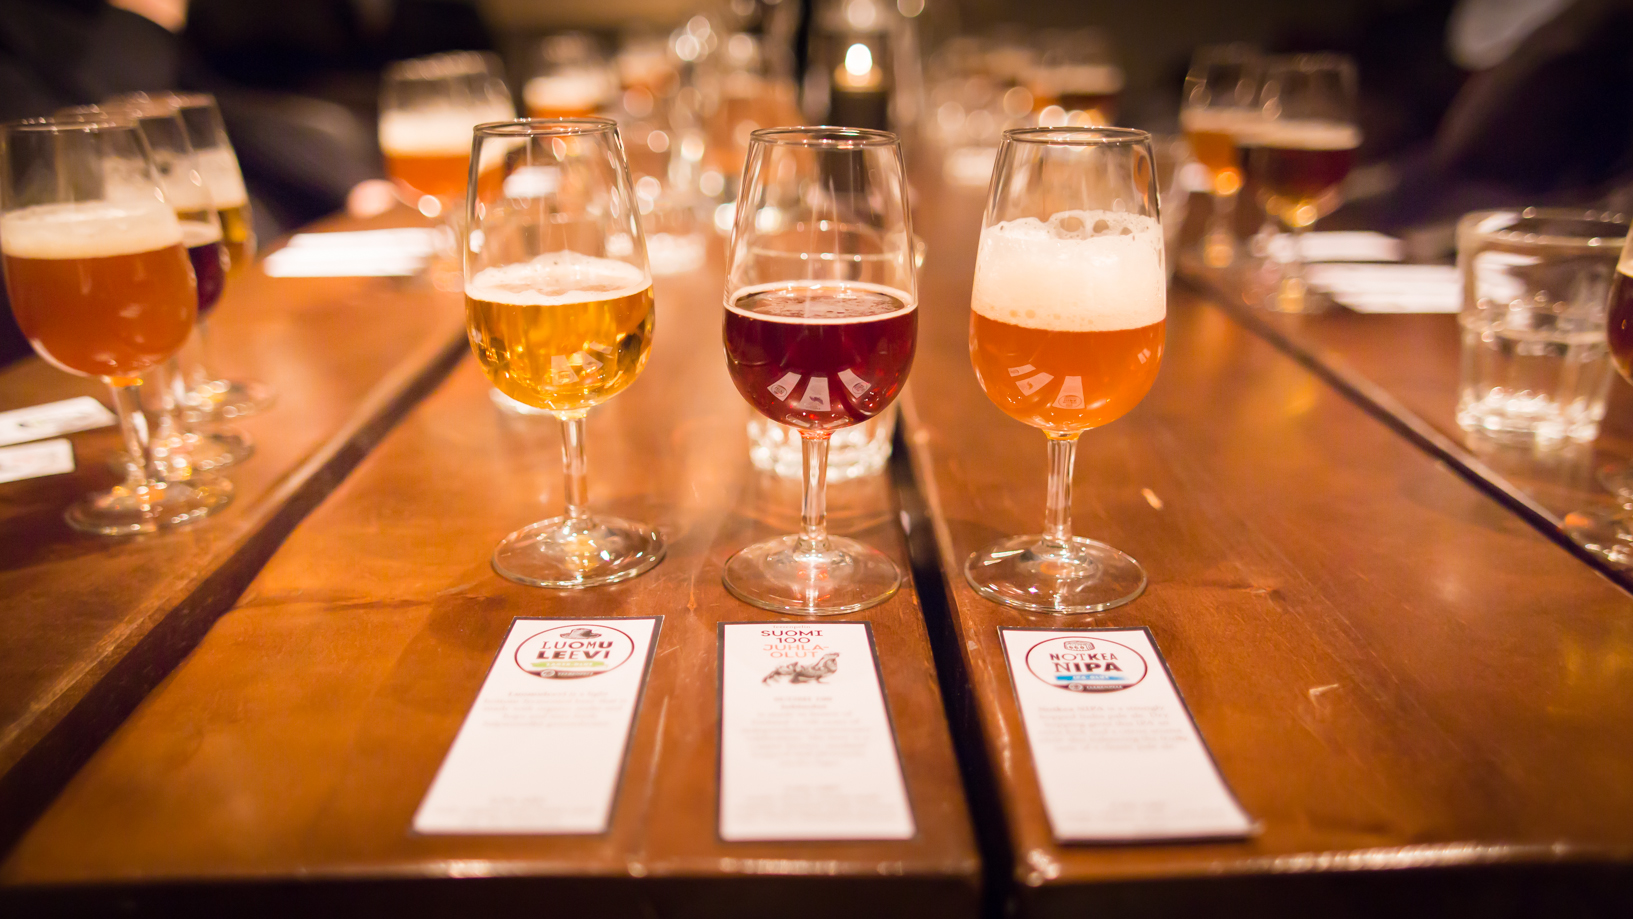 A flight of three beers in long-stemmed glasses sits at eye level on a wooden table.